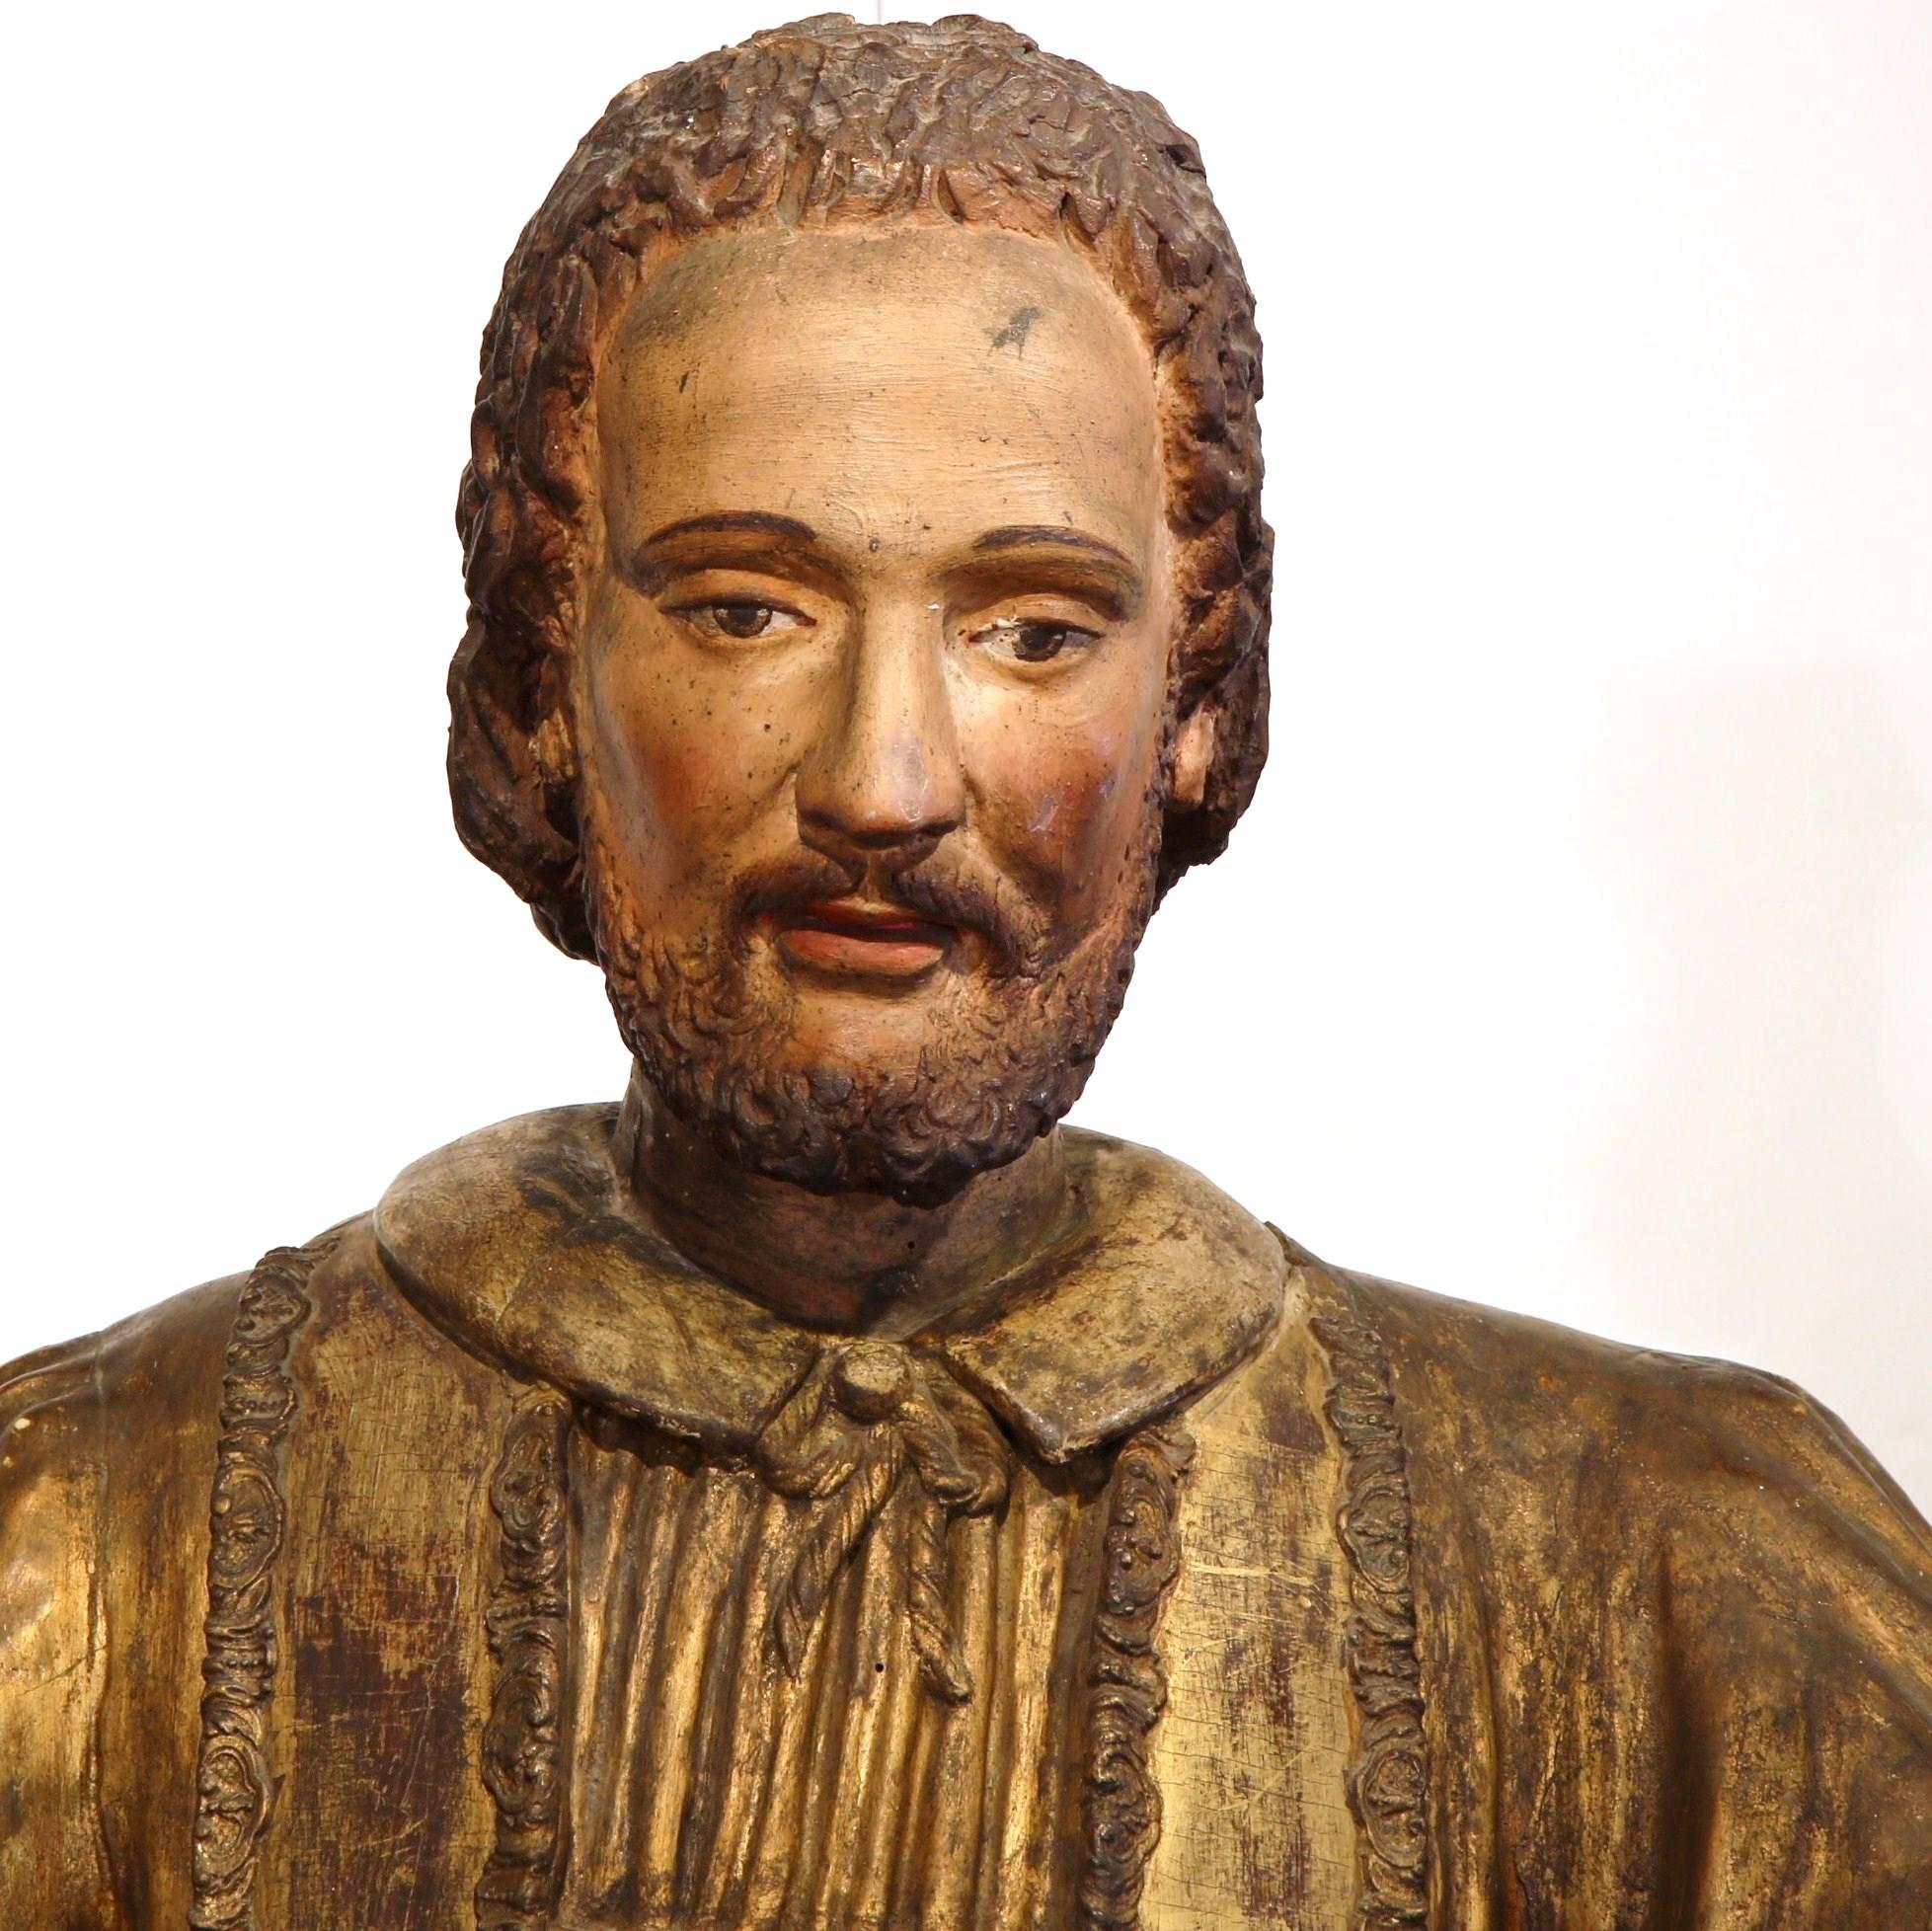 This beautiful, life sized wooden statue of Saint Francois Xavier was crafted in Spain, circa 1790. The antique sculpture features wonderful details on the Saint's ornate clothing, which includes an engraving on both sides of his stole (vestment).